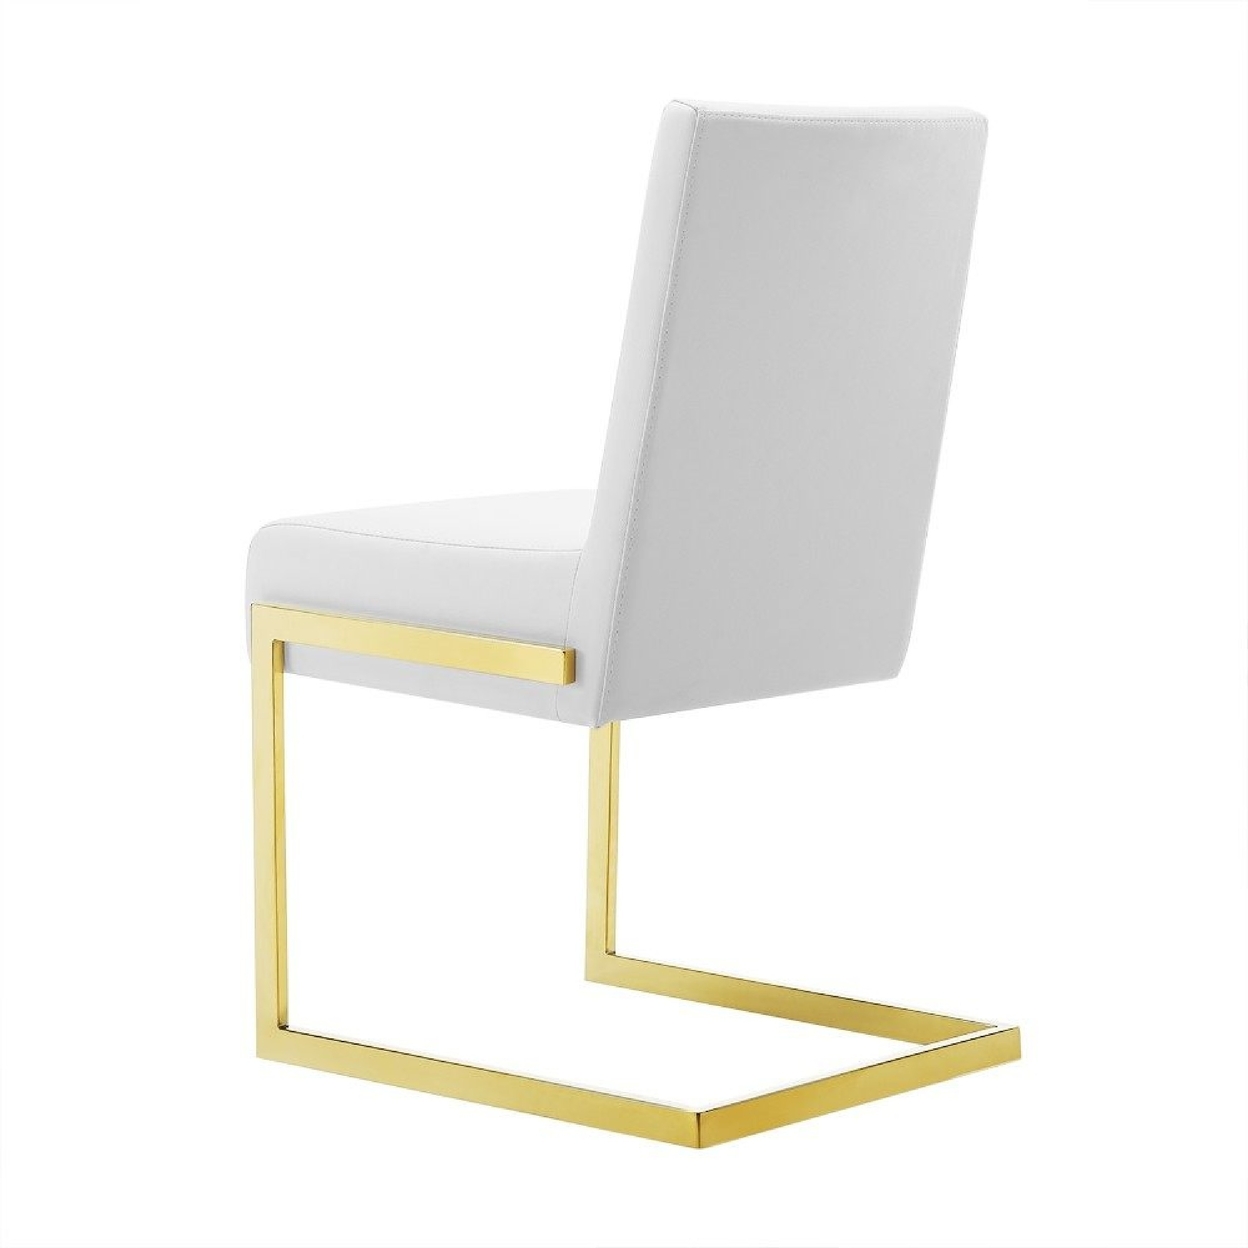 19 Inch Dining Chair, Set Of 2, White Vegan Leather, Gold Cantilever Base- Saltoro Sherpi